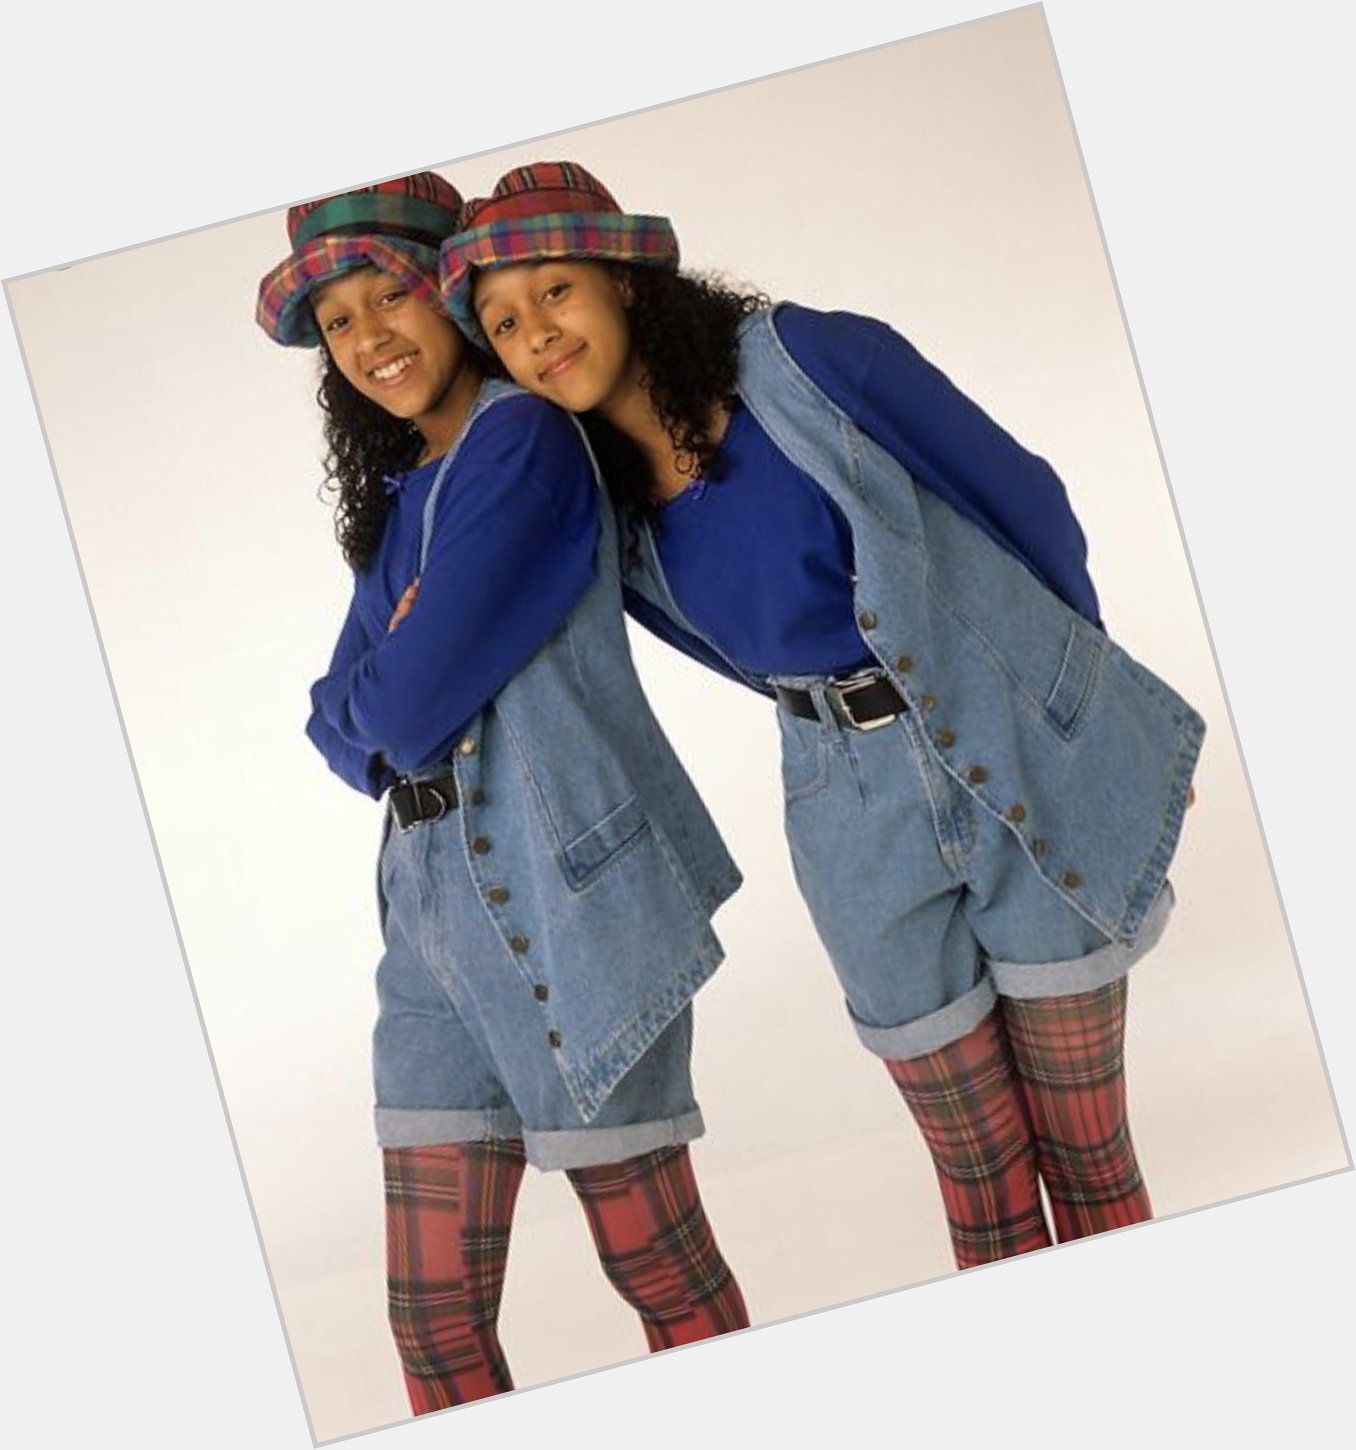 Happy 39th Birthday To Our Favorite Childhood Twins Tia And Tamera Mowry . 